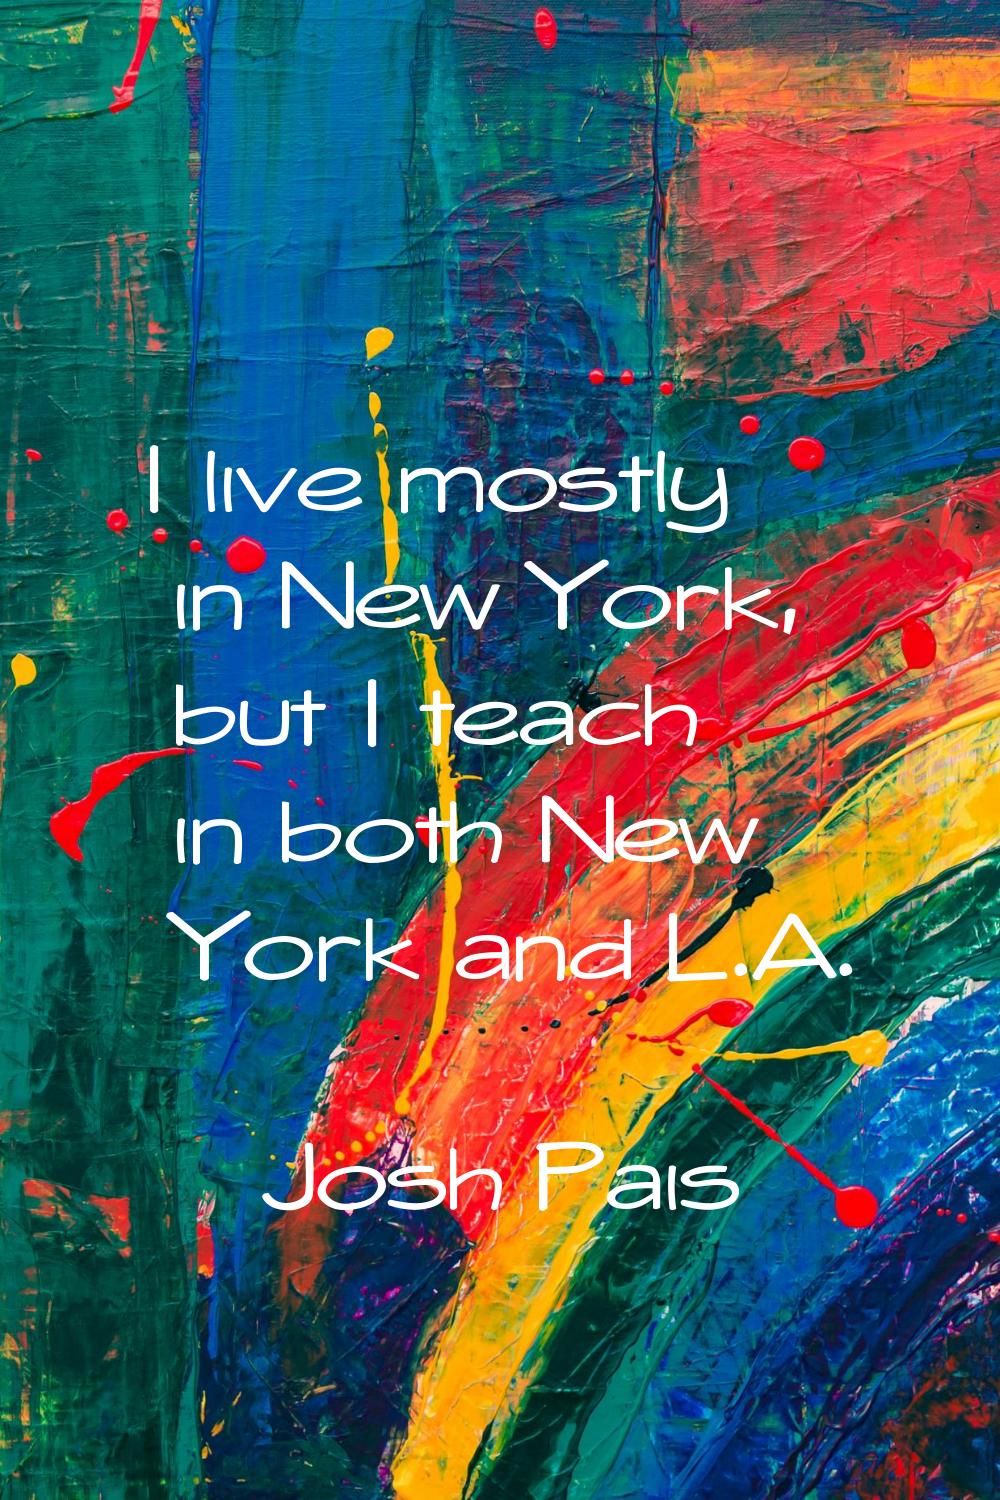 I live mostly in New York, but I teach in both New York and L.A.